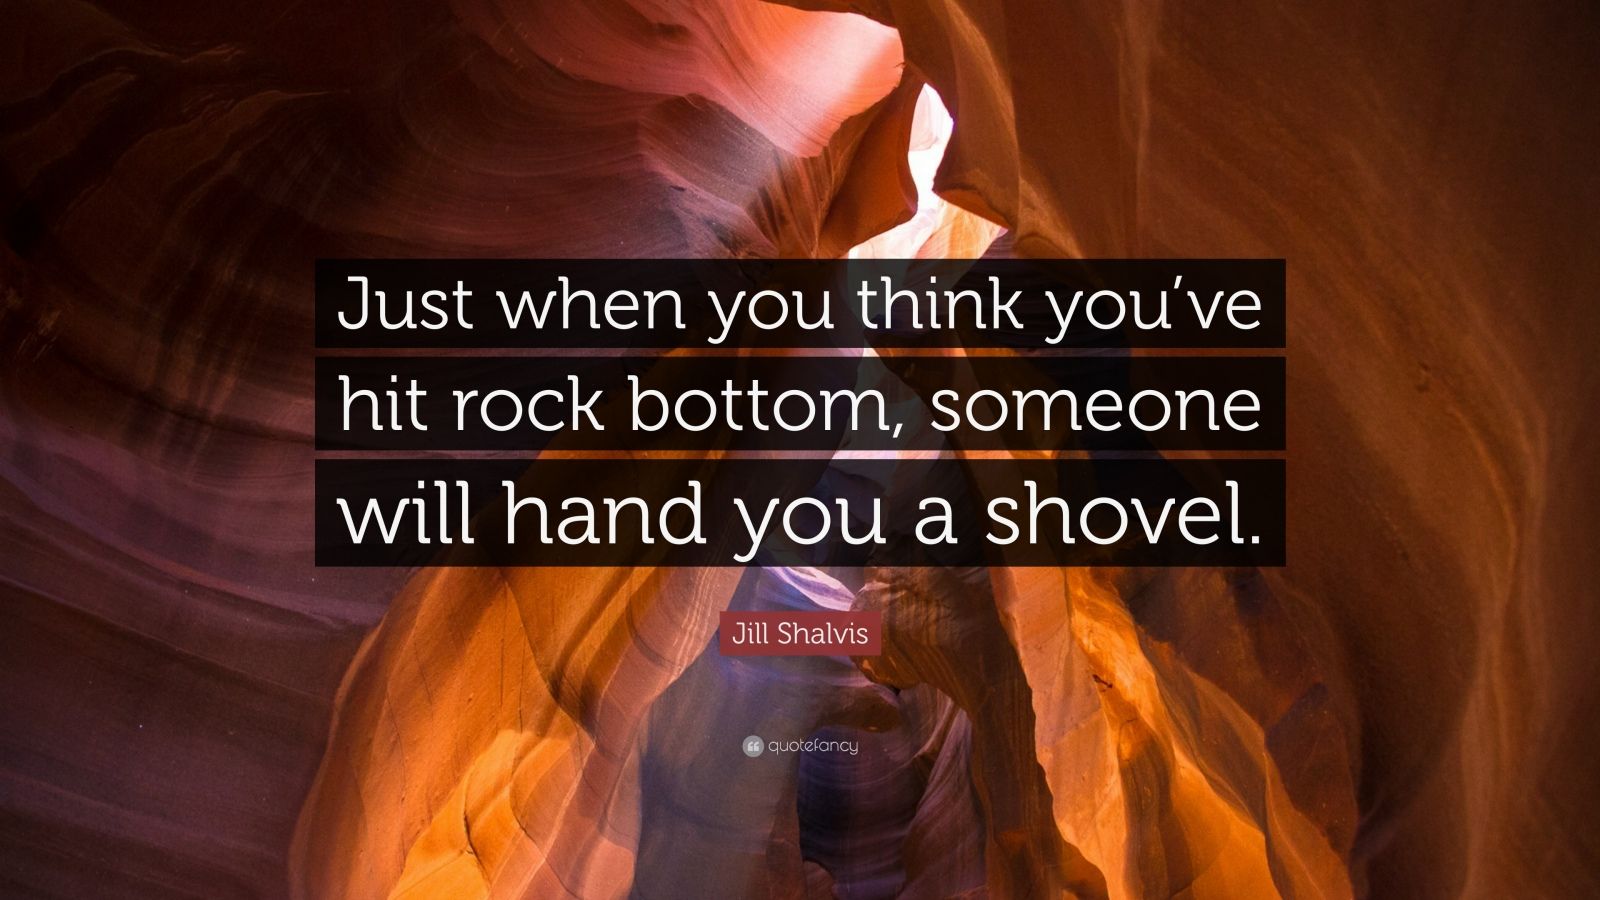 Jill Shalvis Quote “just When You Think You Ve Hit Rock Bottom Someone Will Hand You A Shovel ”